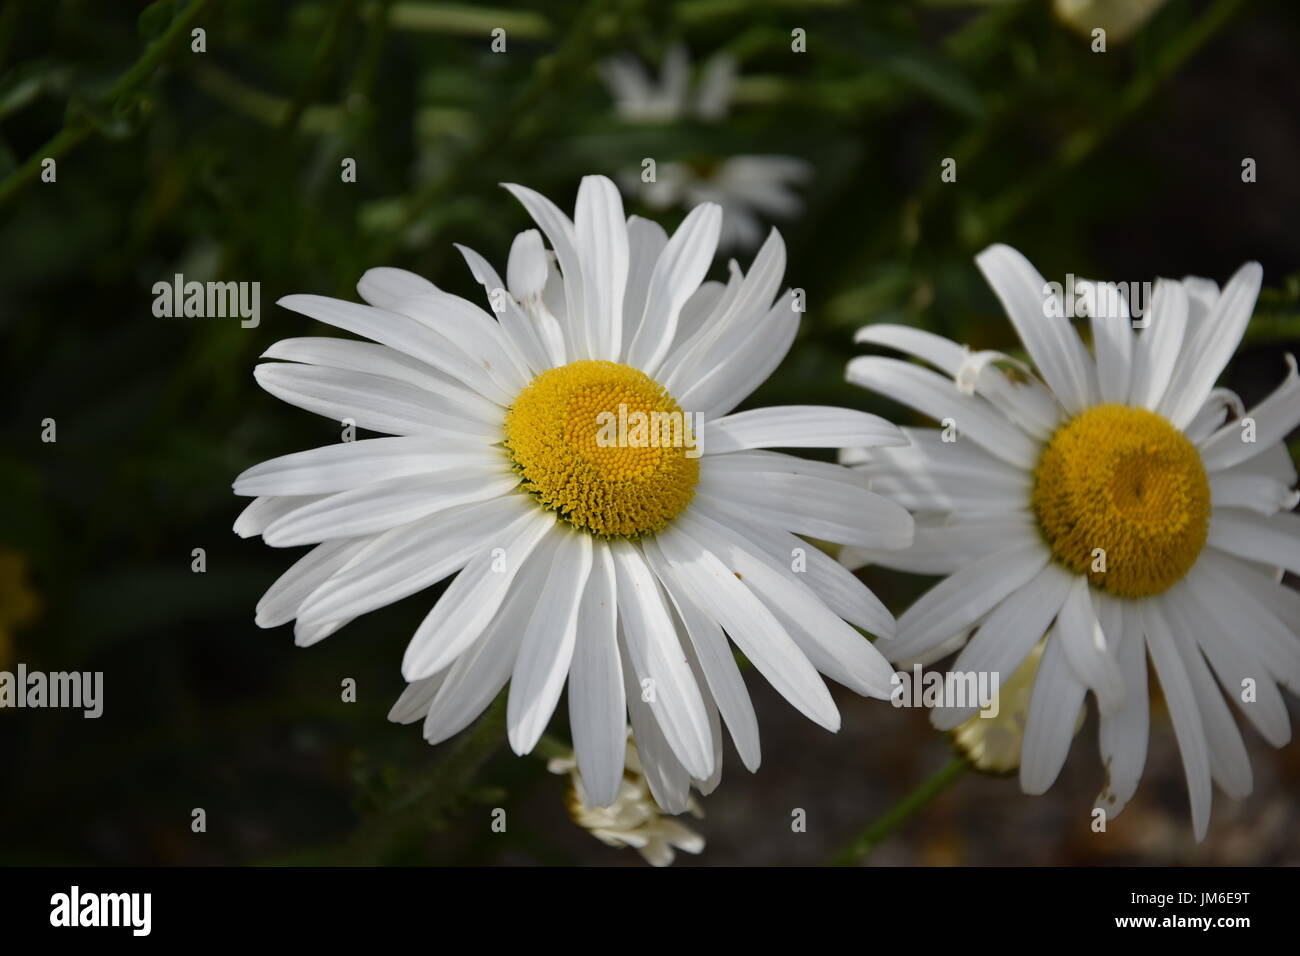 Inflorescence of Common Daisy, Lawn Daisy or English Daisy (Bellis perennis) Stock Photo